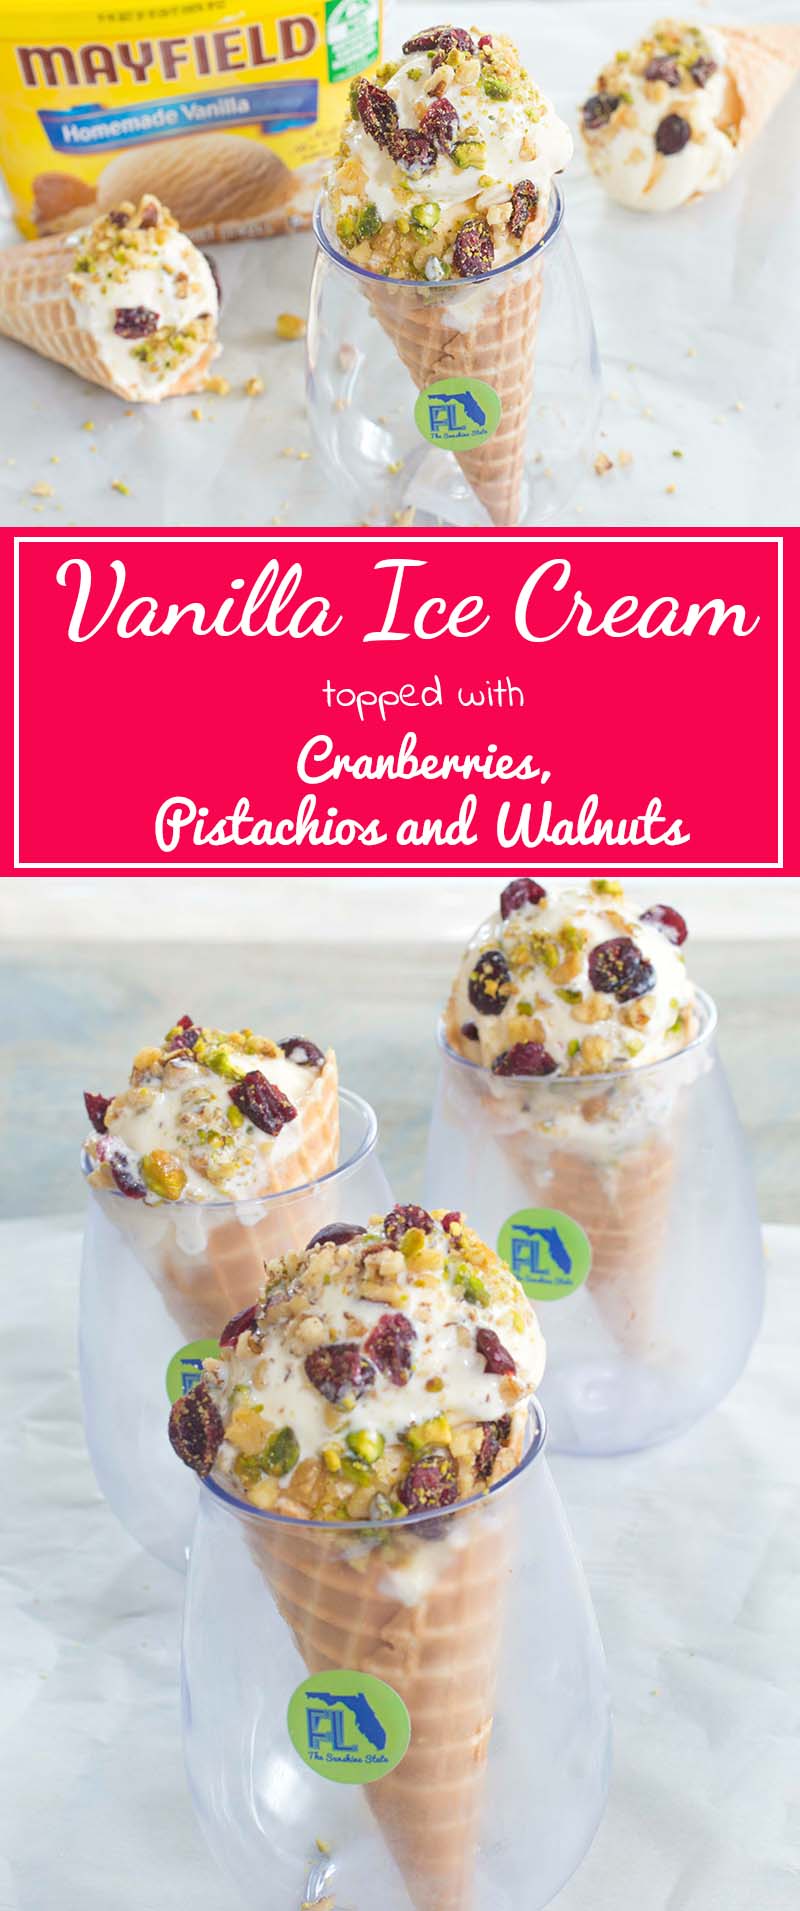 Mayfield Homemade Vanilla Ice Cream topped with Walnuts, Cranberries & Pistachios. Take the ice cream experience to a whole new level by putting it in cones